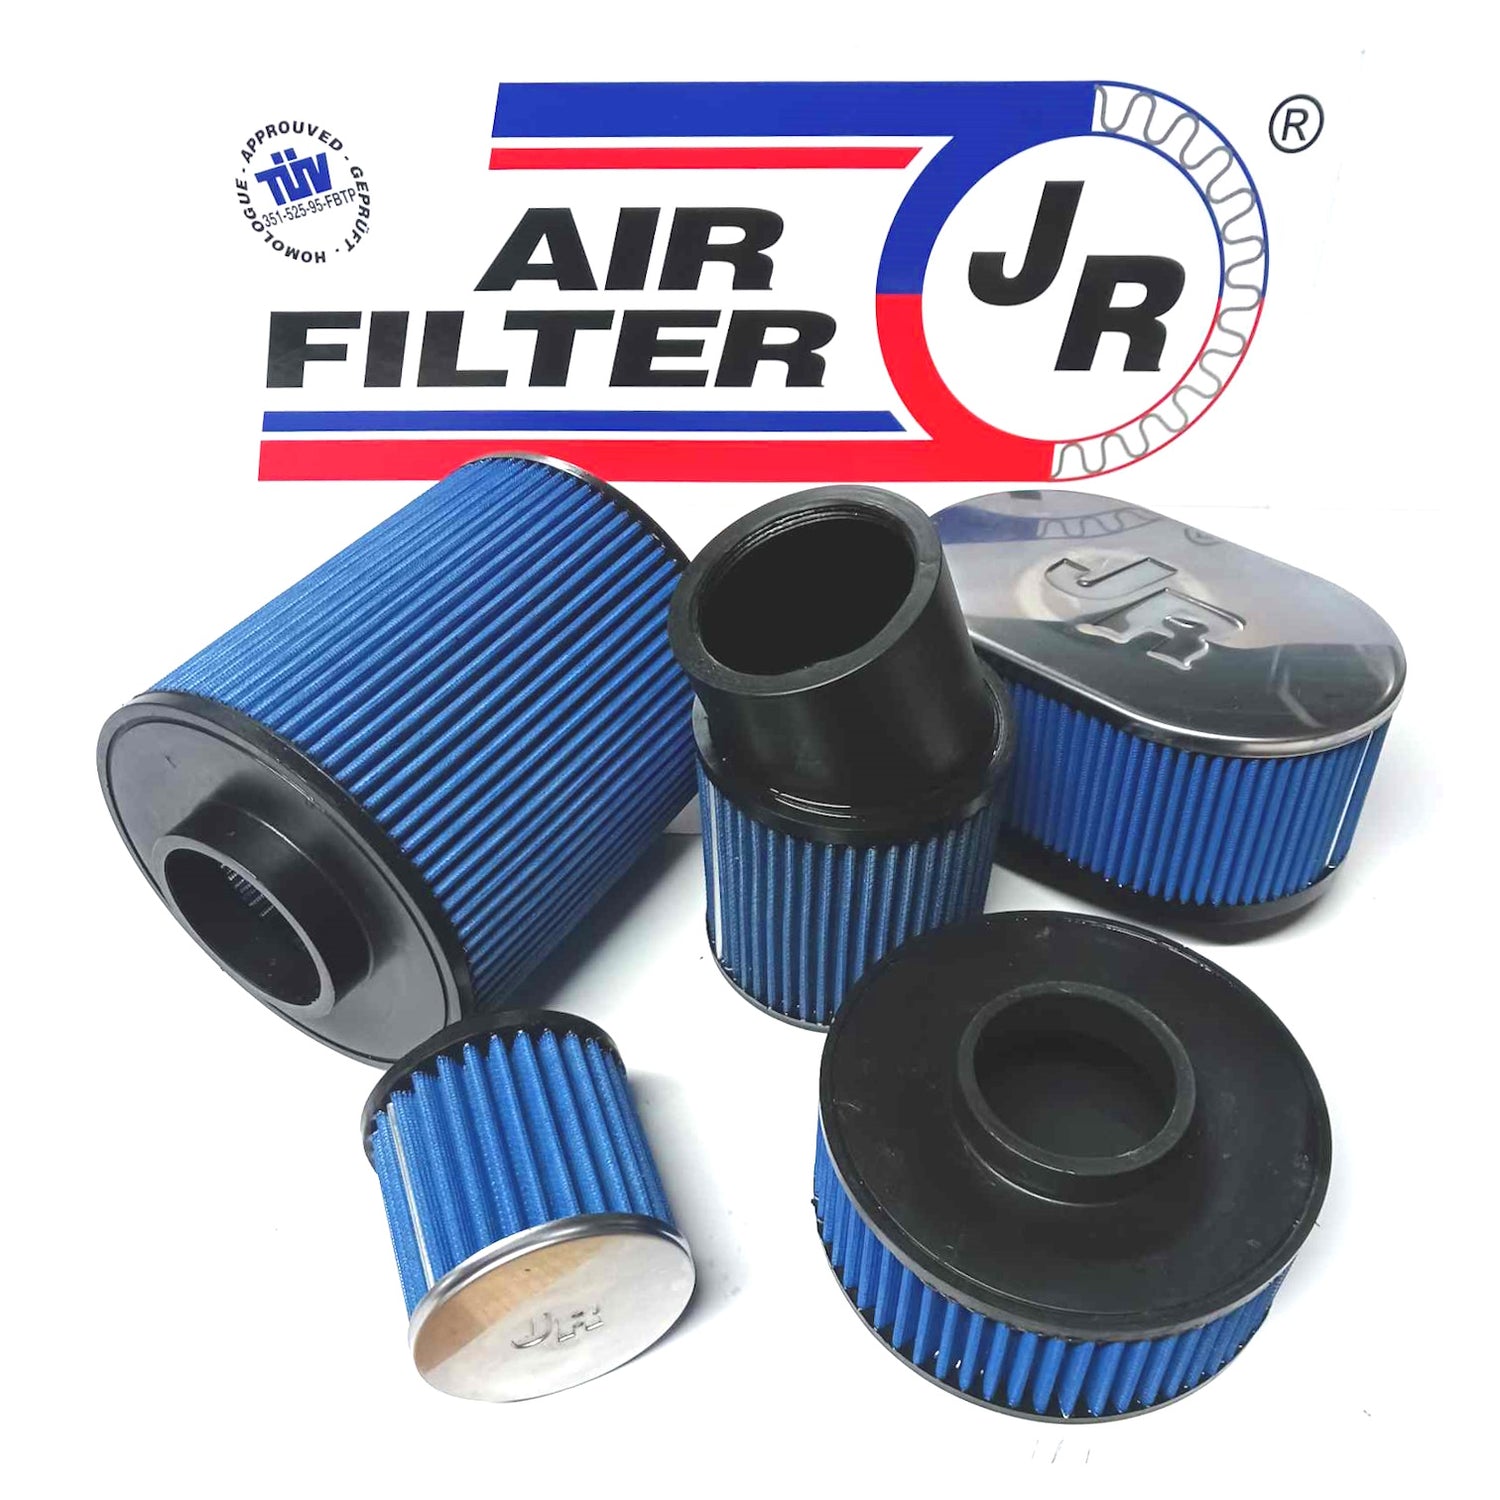 FILTRE A AIR UNIVERSEL CYLINDRIQUE – jrfilters